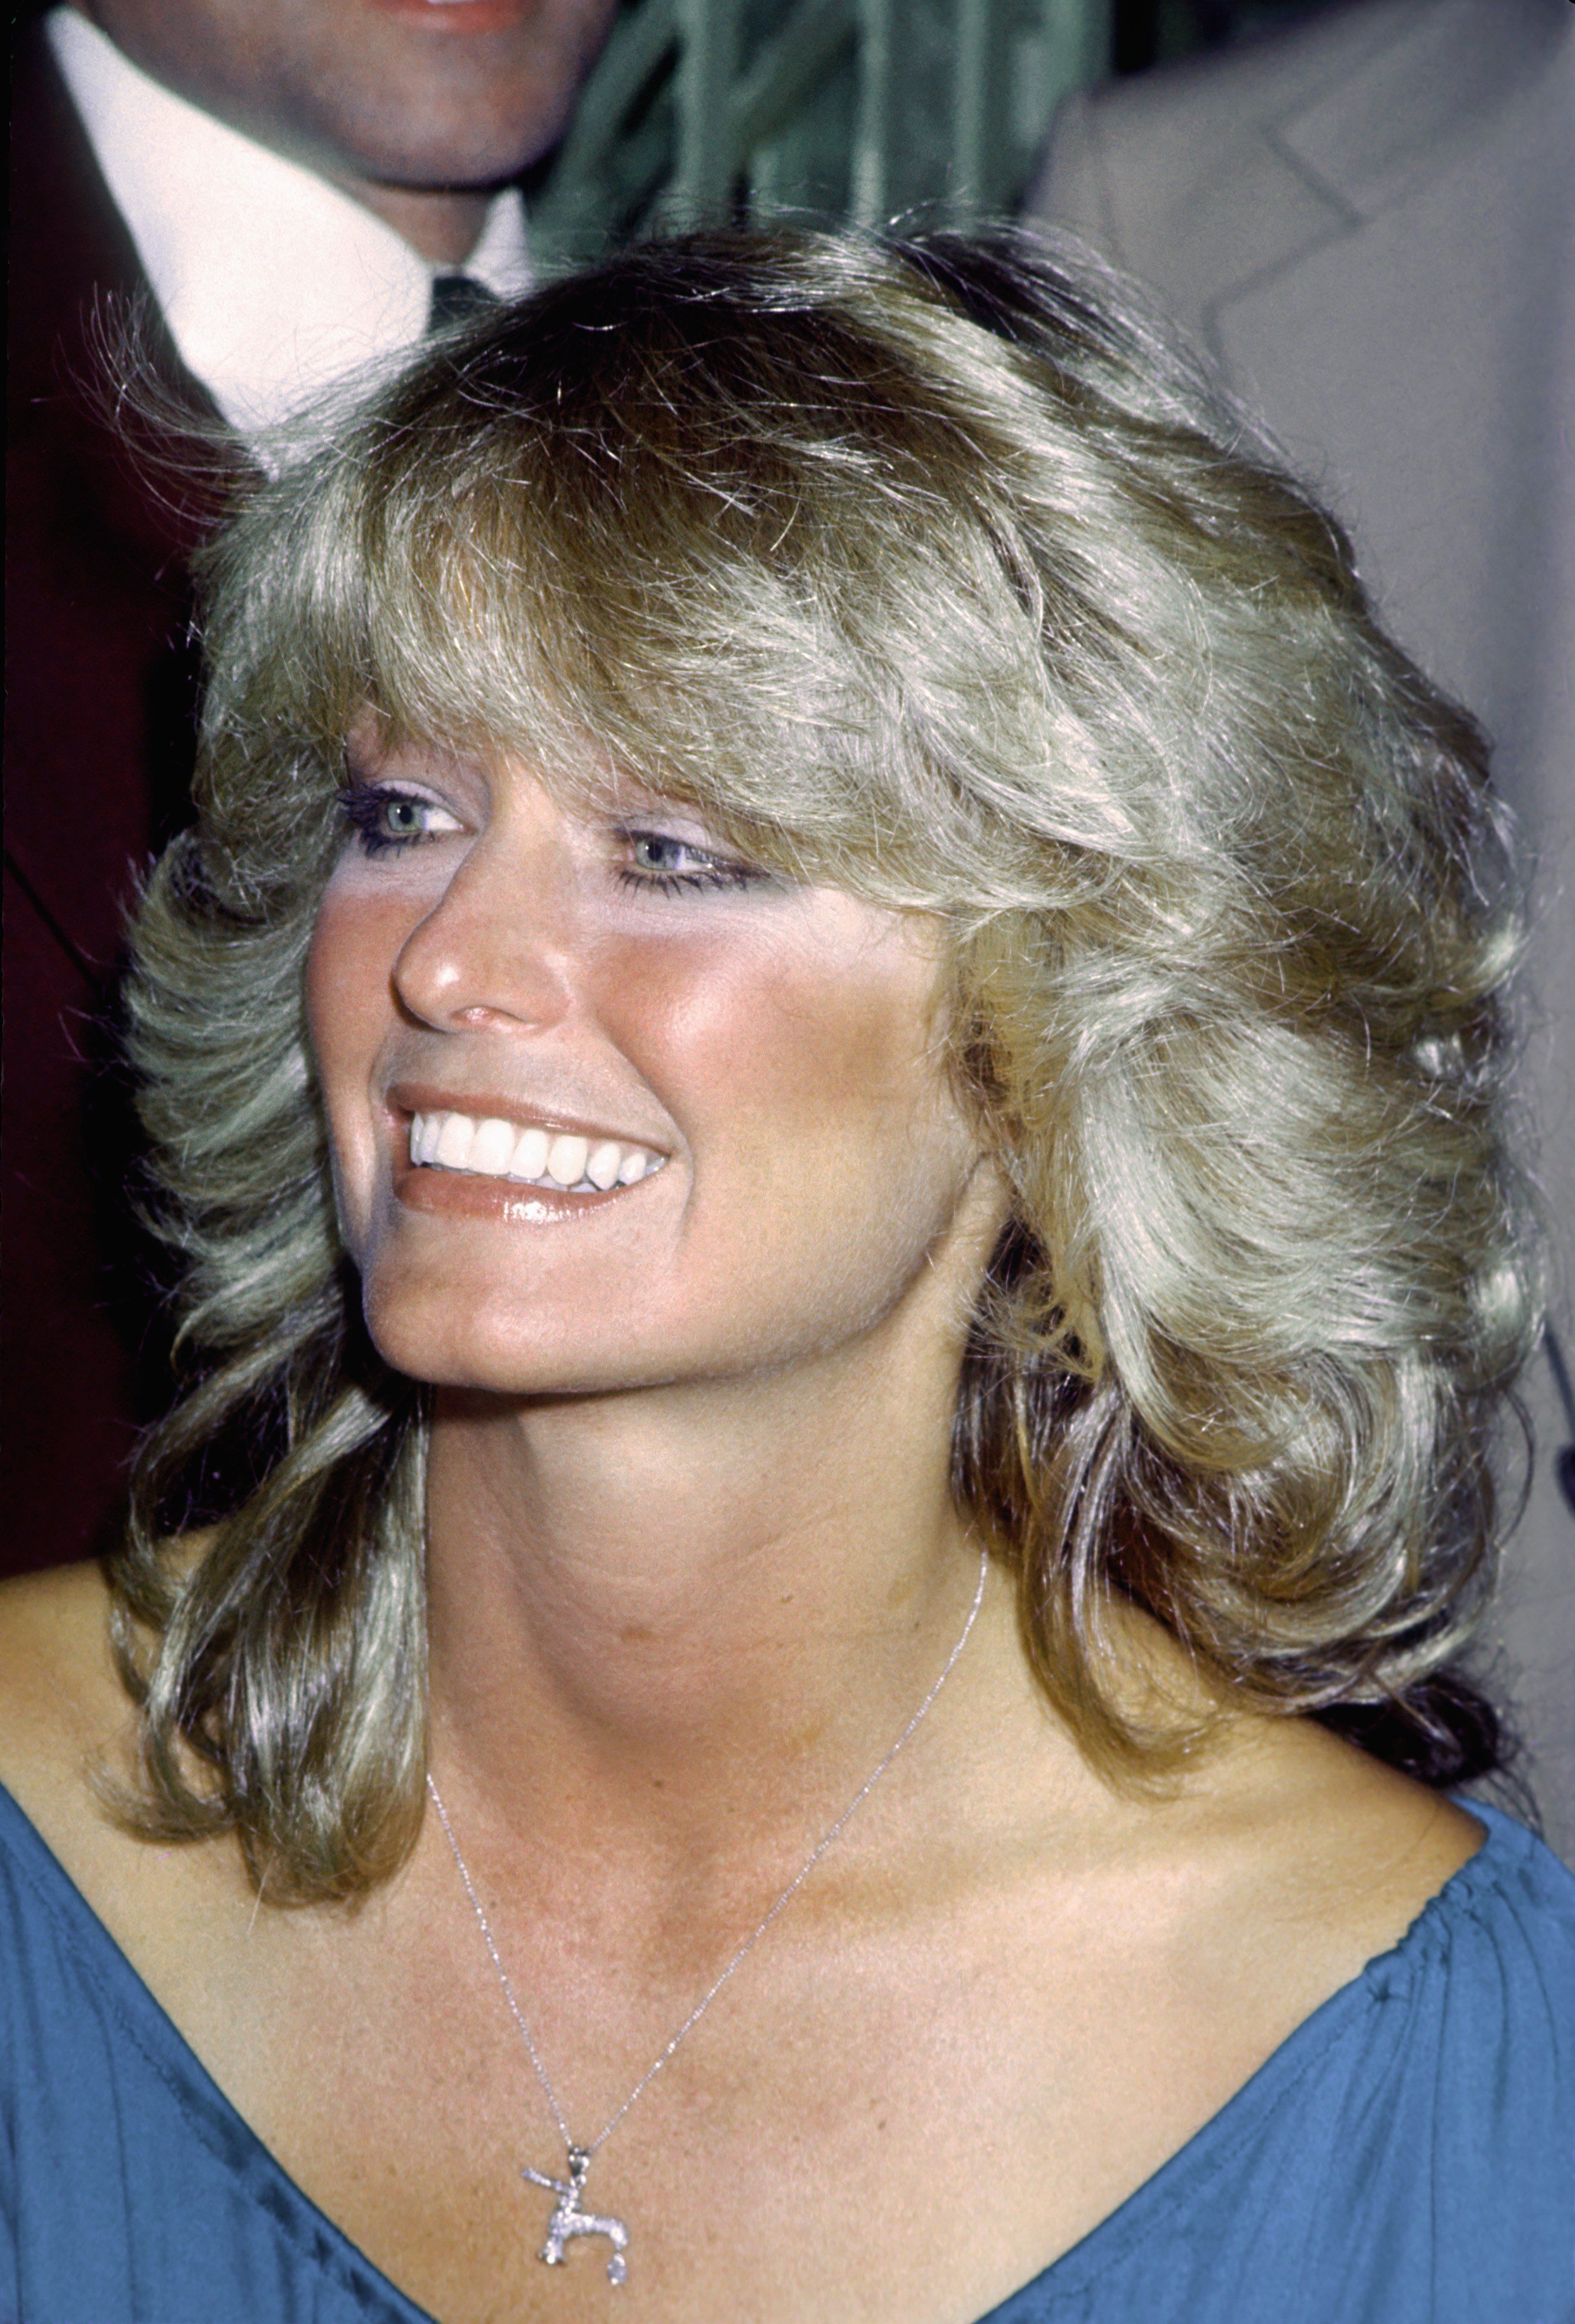 16 Worst Beauty Trends From the 1970s — Worst '70s